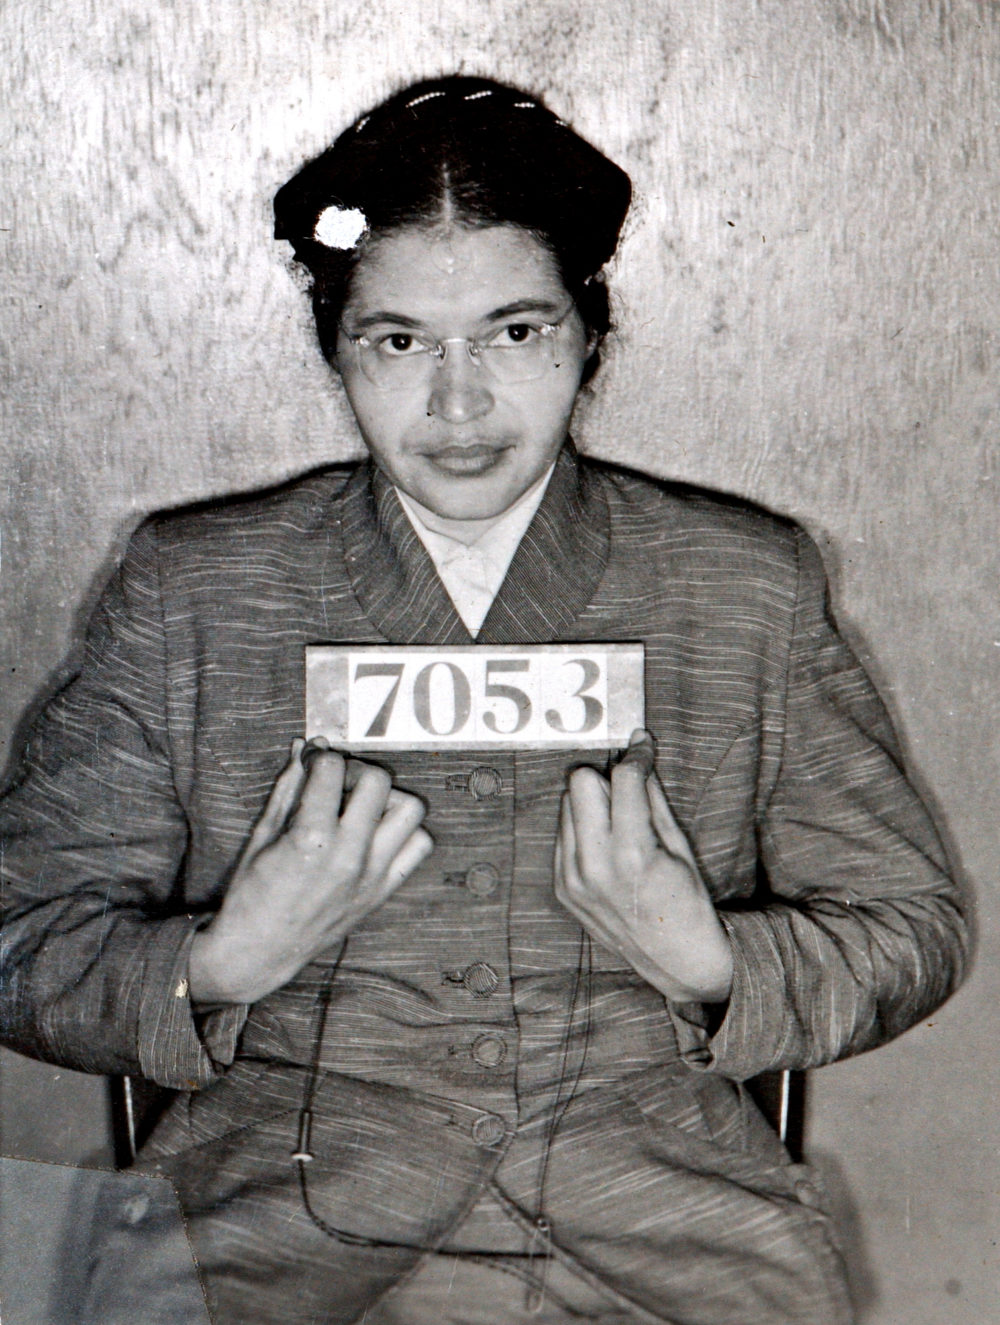 A Montgomery (Ala.) Sheriff's Department booking photo of Rosa Parks taken Feb 22, 1956, after she was arrested for refusing to give up her seat on a bus for a white passenger.  (AP via Montgomery County Sheriff's office)